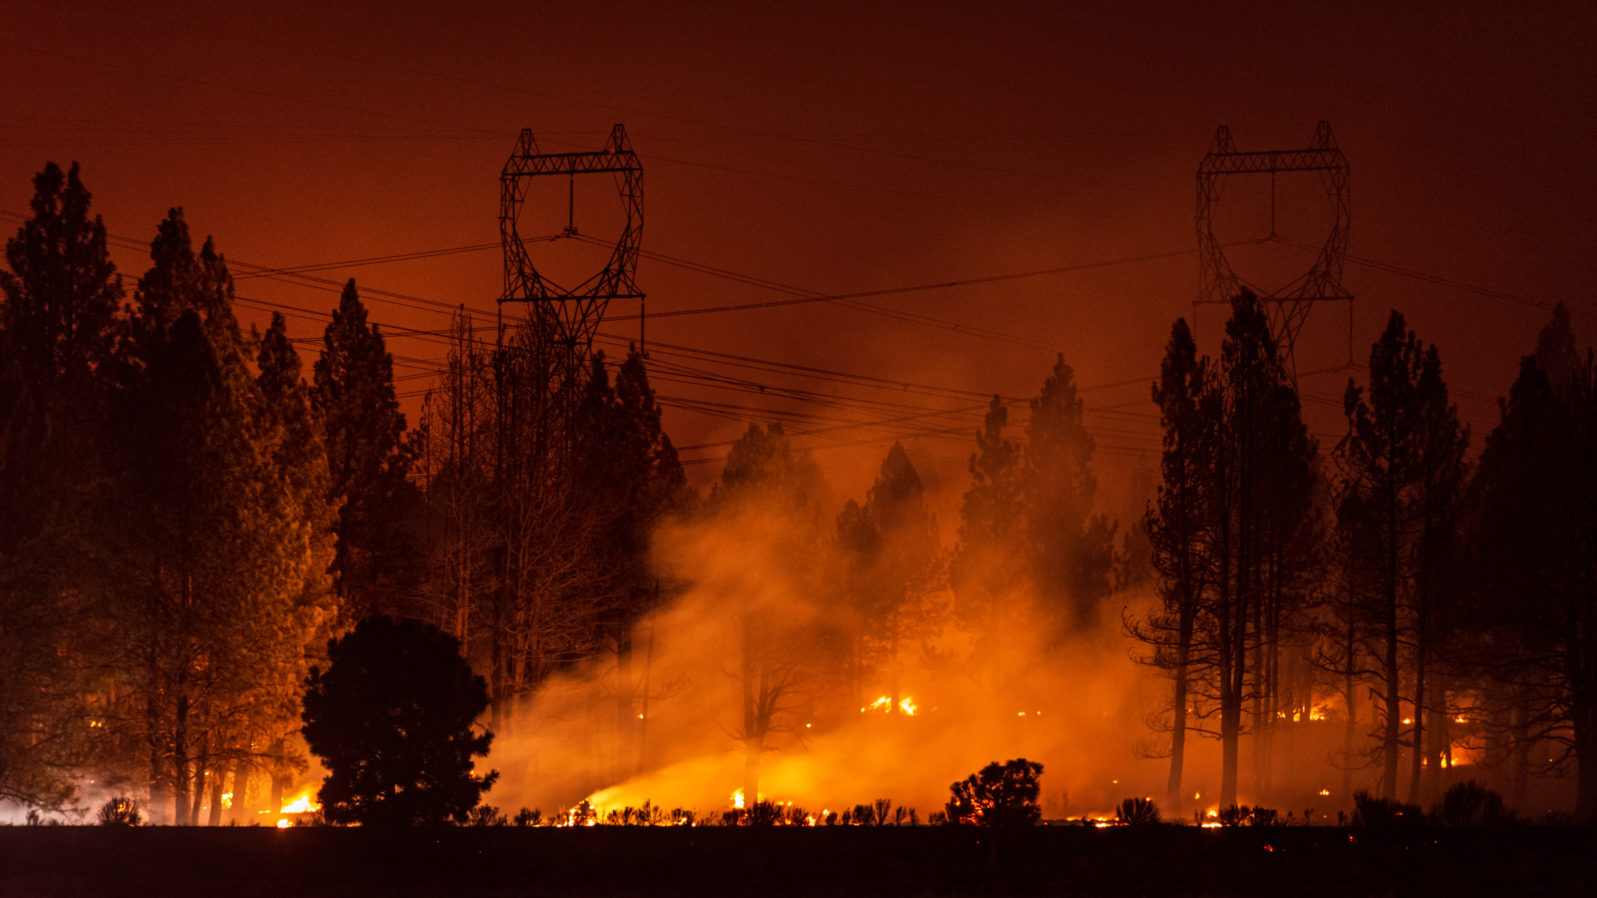 Wildfire under transmission power lines